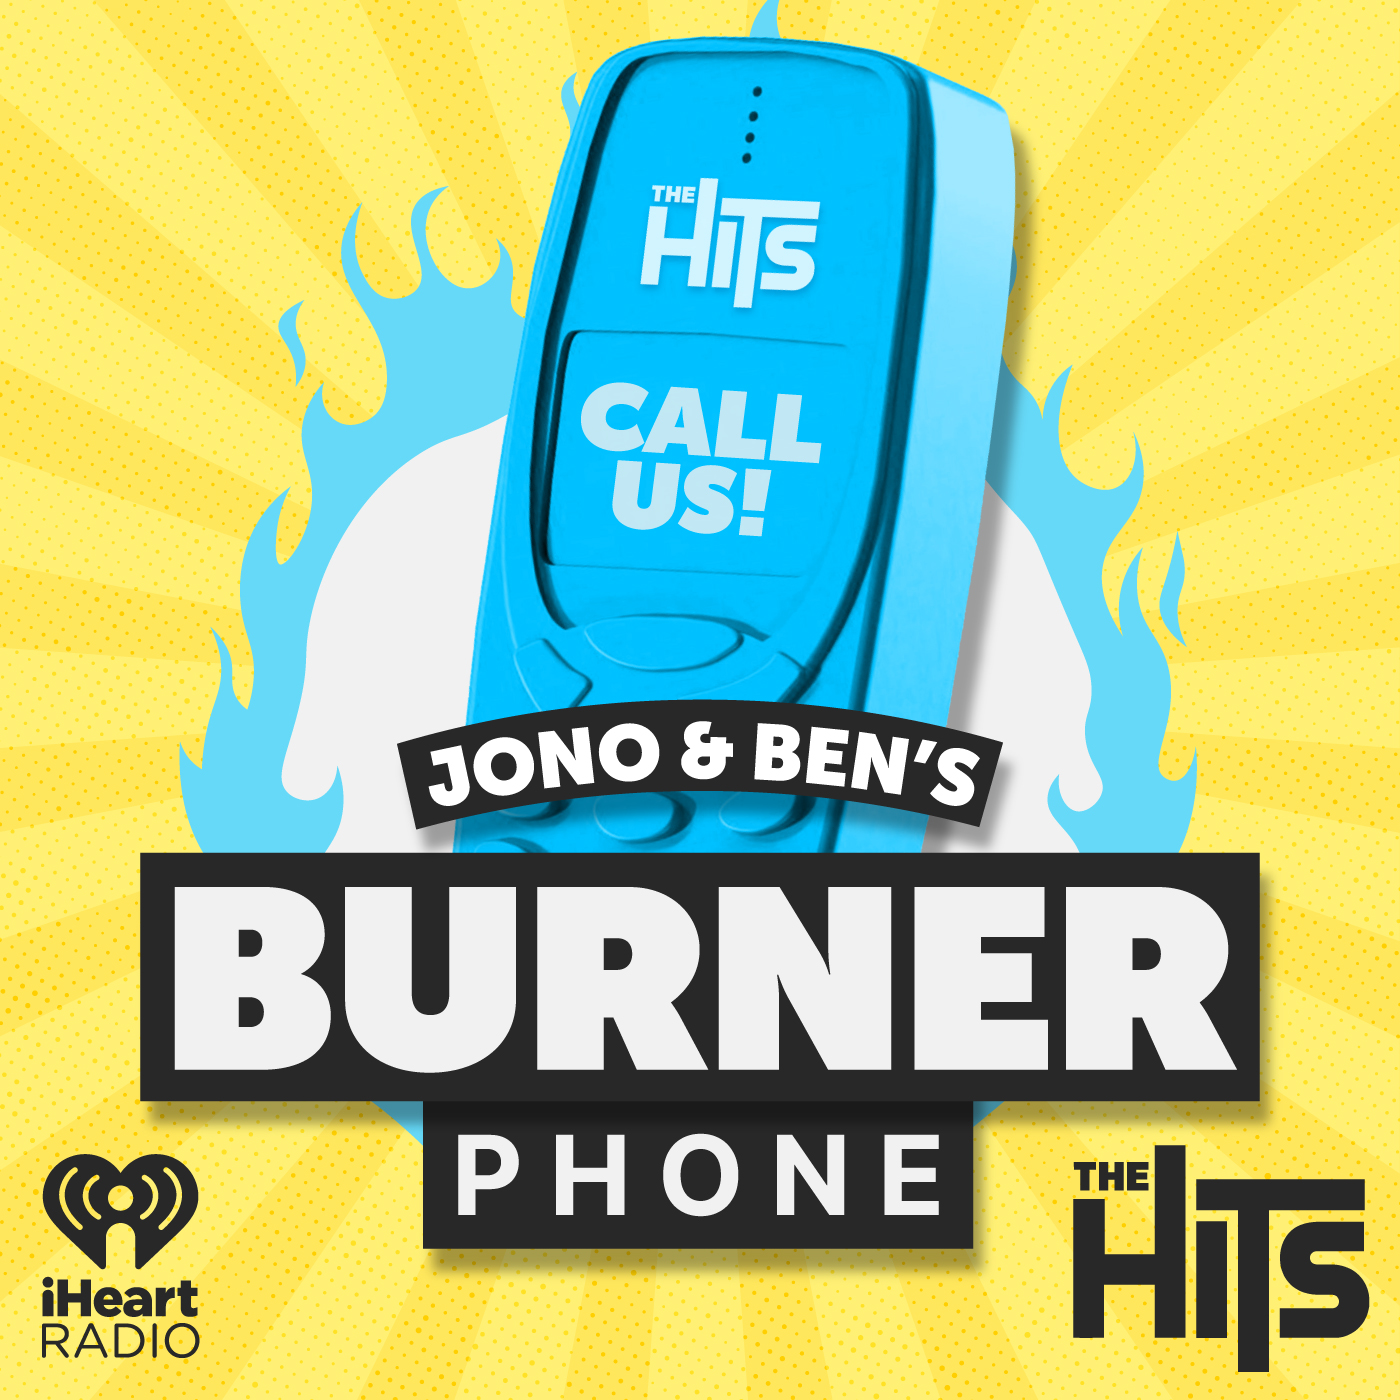 The Burner Phone 13: The Changing Room Scandal...